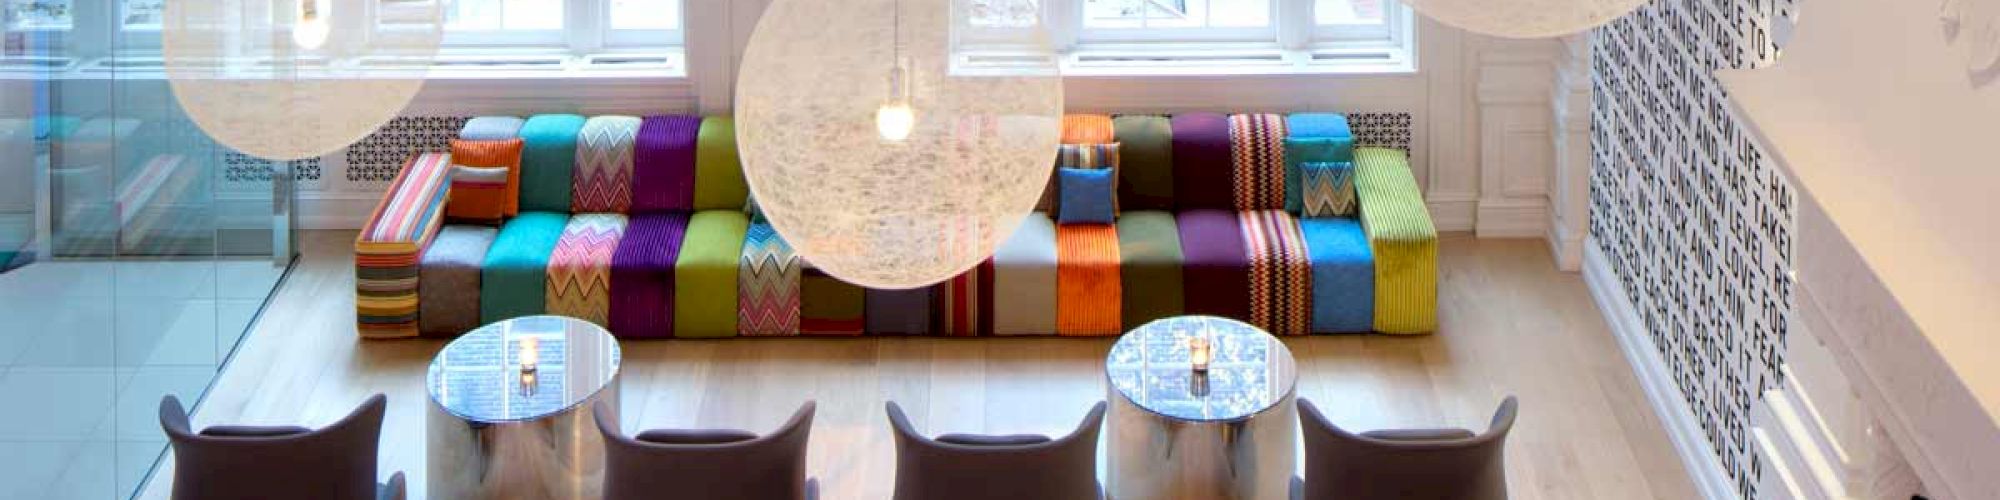 A modern lobby or lounge area with colorful seating, unique spherical light fixtures, large windows, and contemporary furniture.